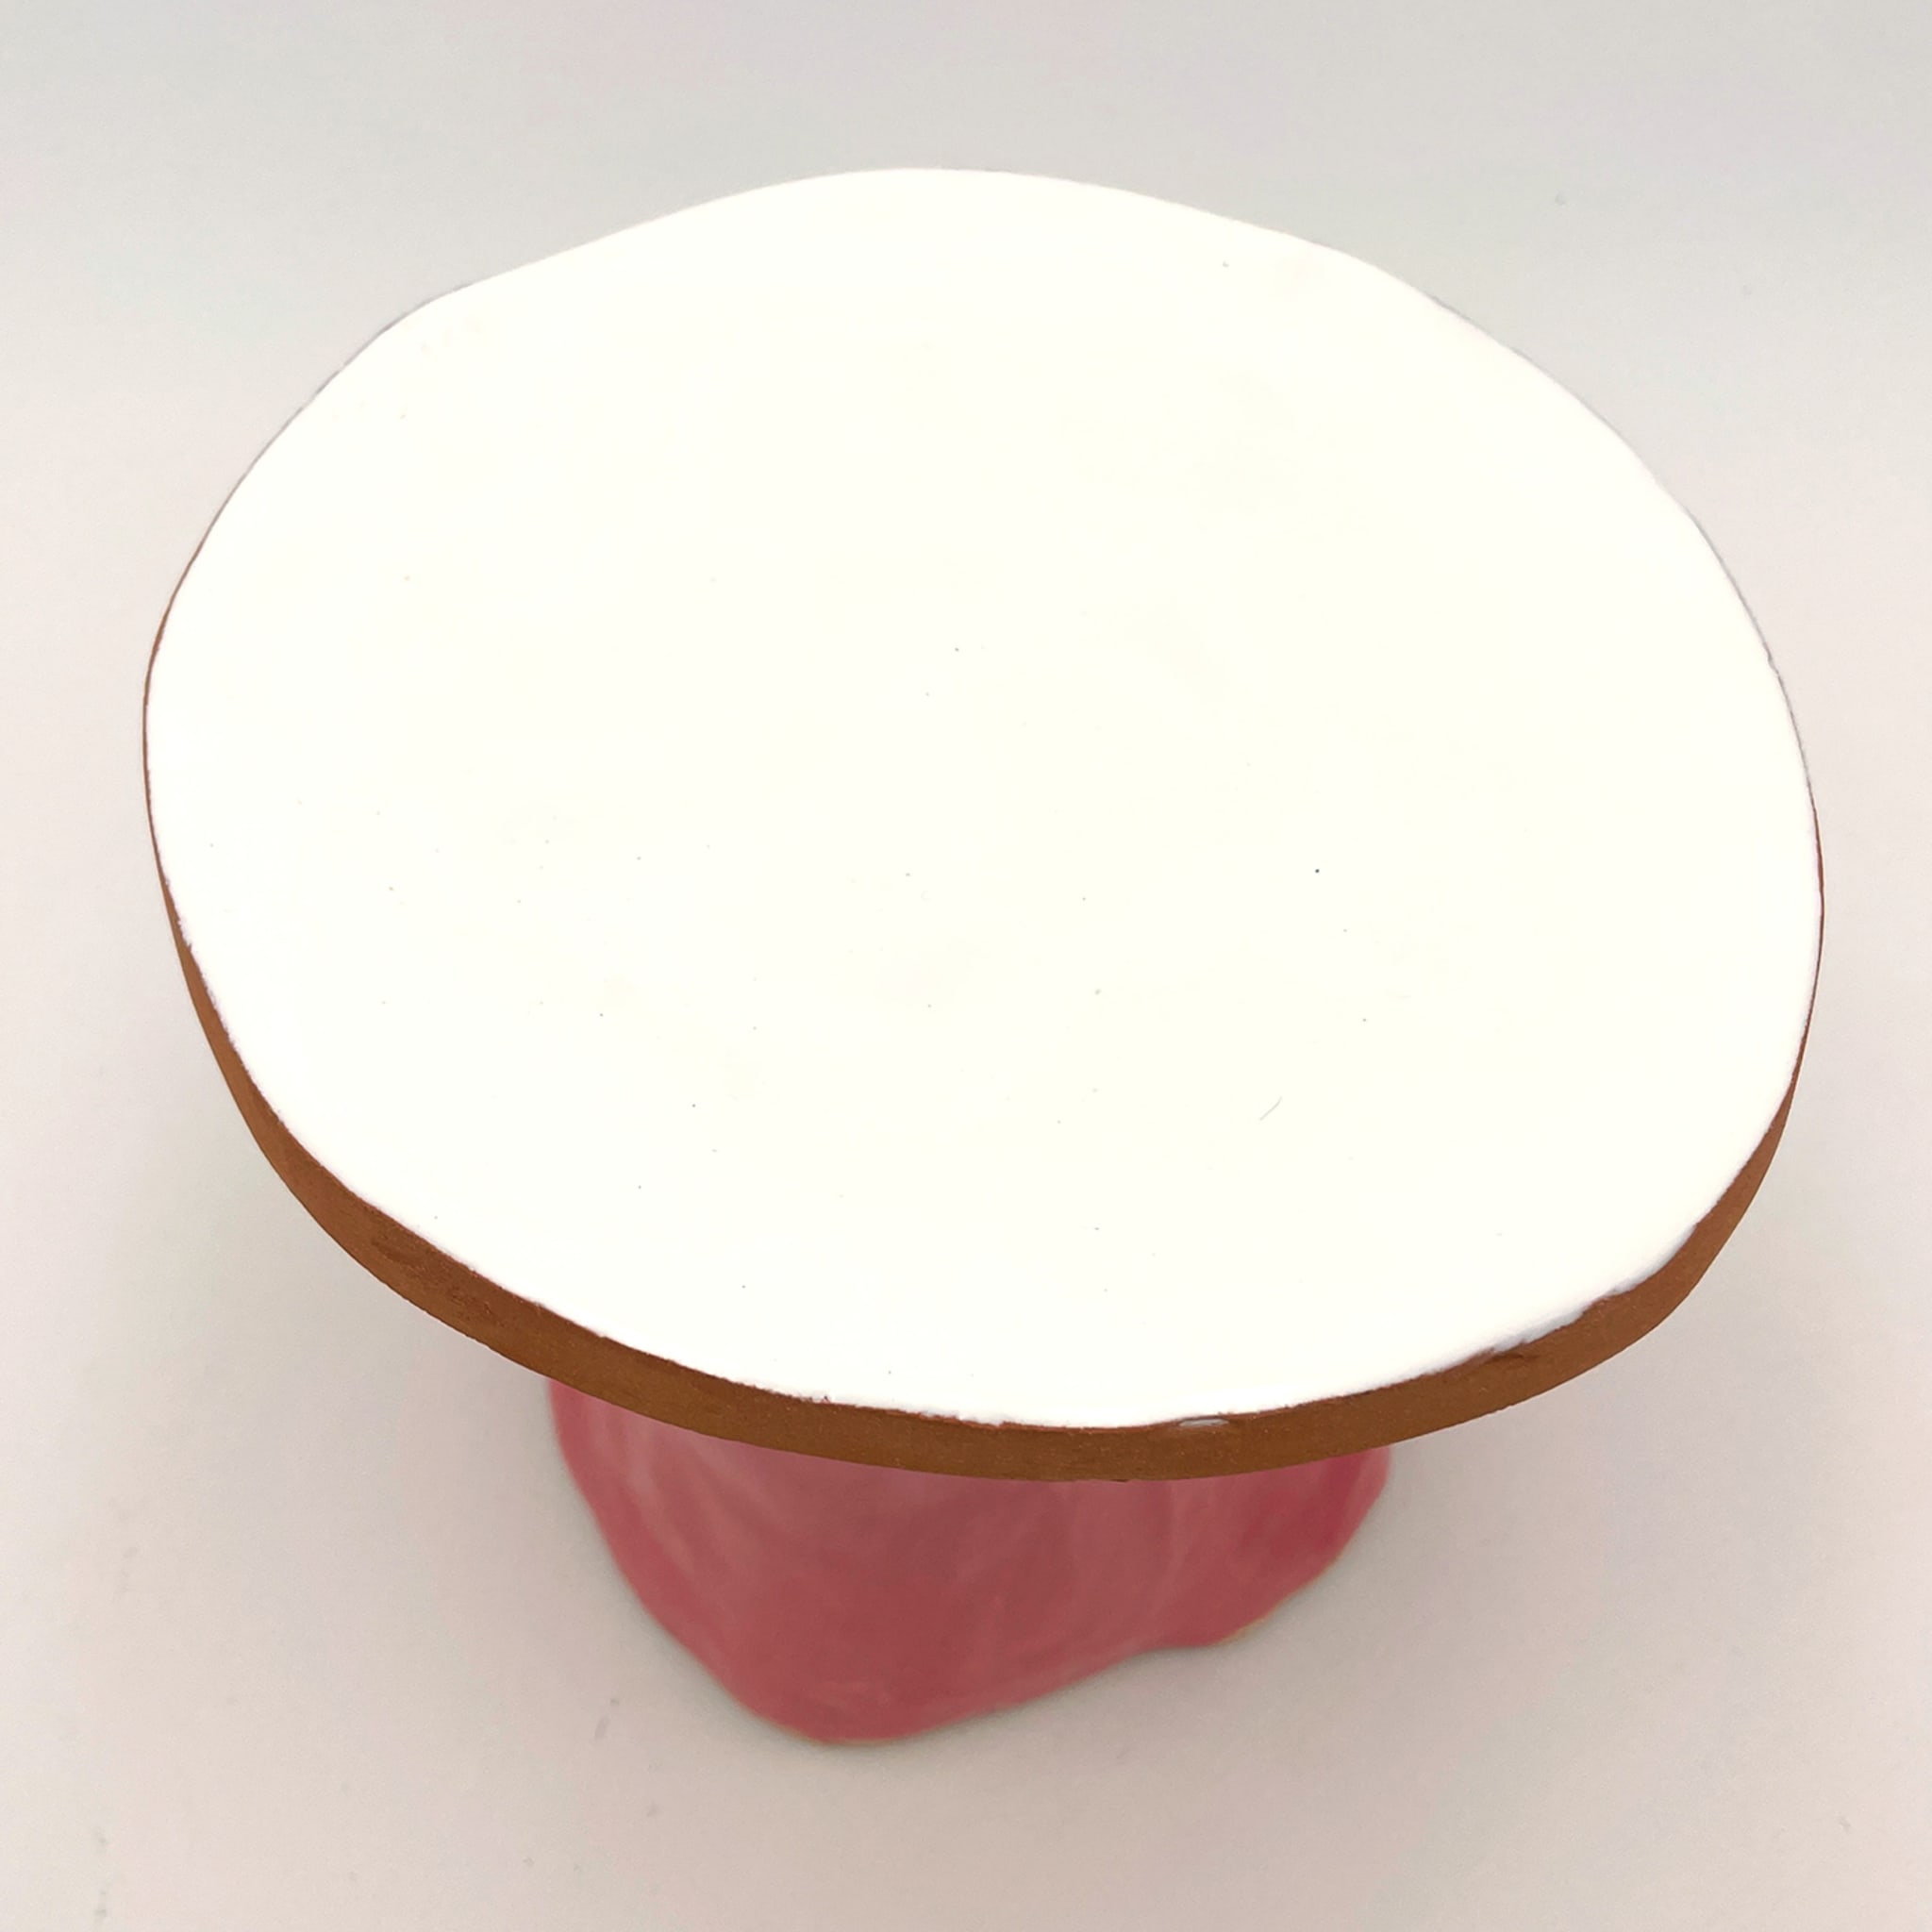 Fungo Rock Pink and Shiny White Cake Stand - Alternative view 1